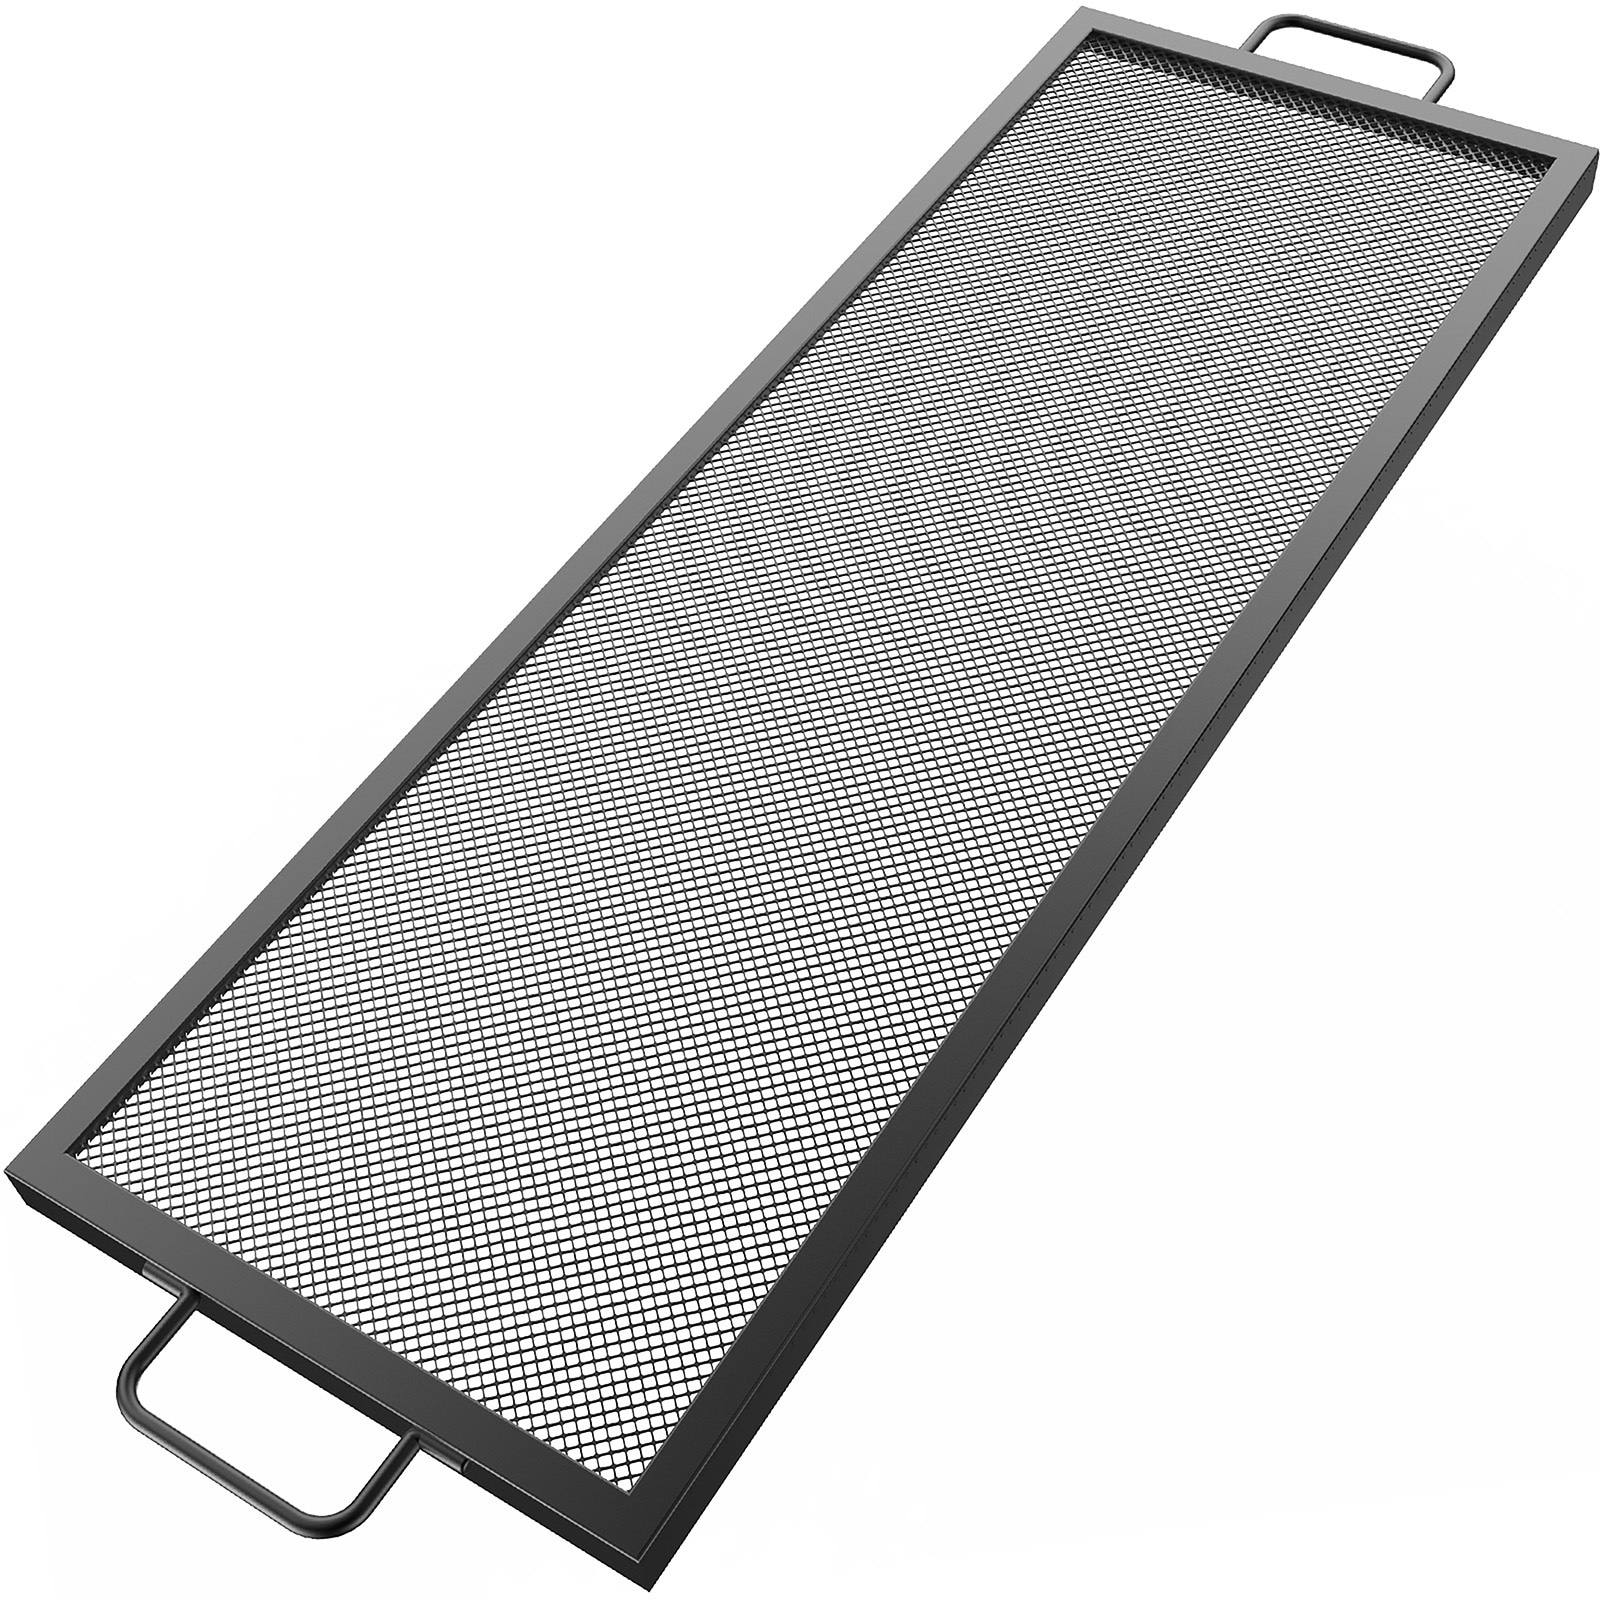 VEVOR Rectangular Stainless Steel Griddle 32 in. x 14 in. Hibachi